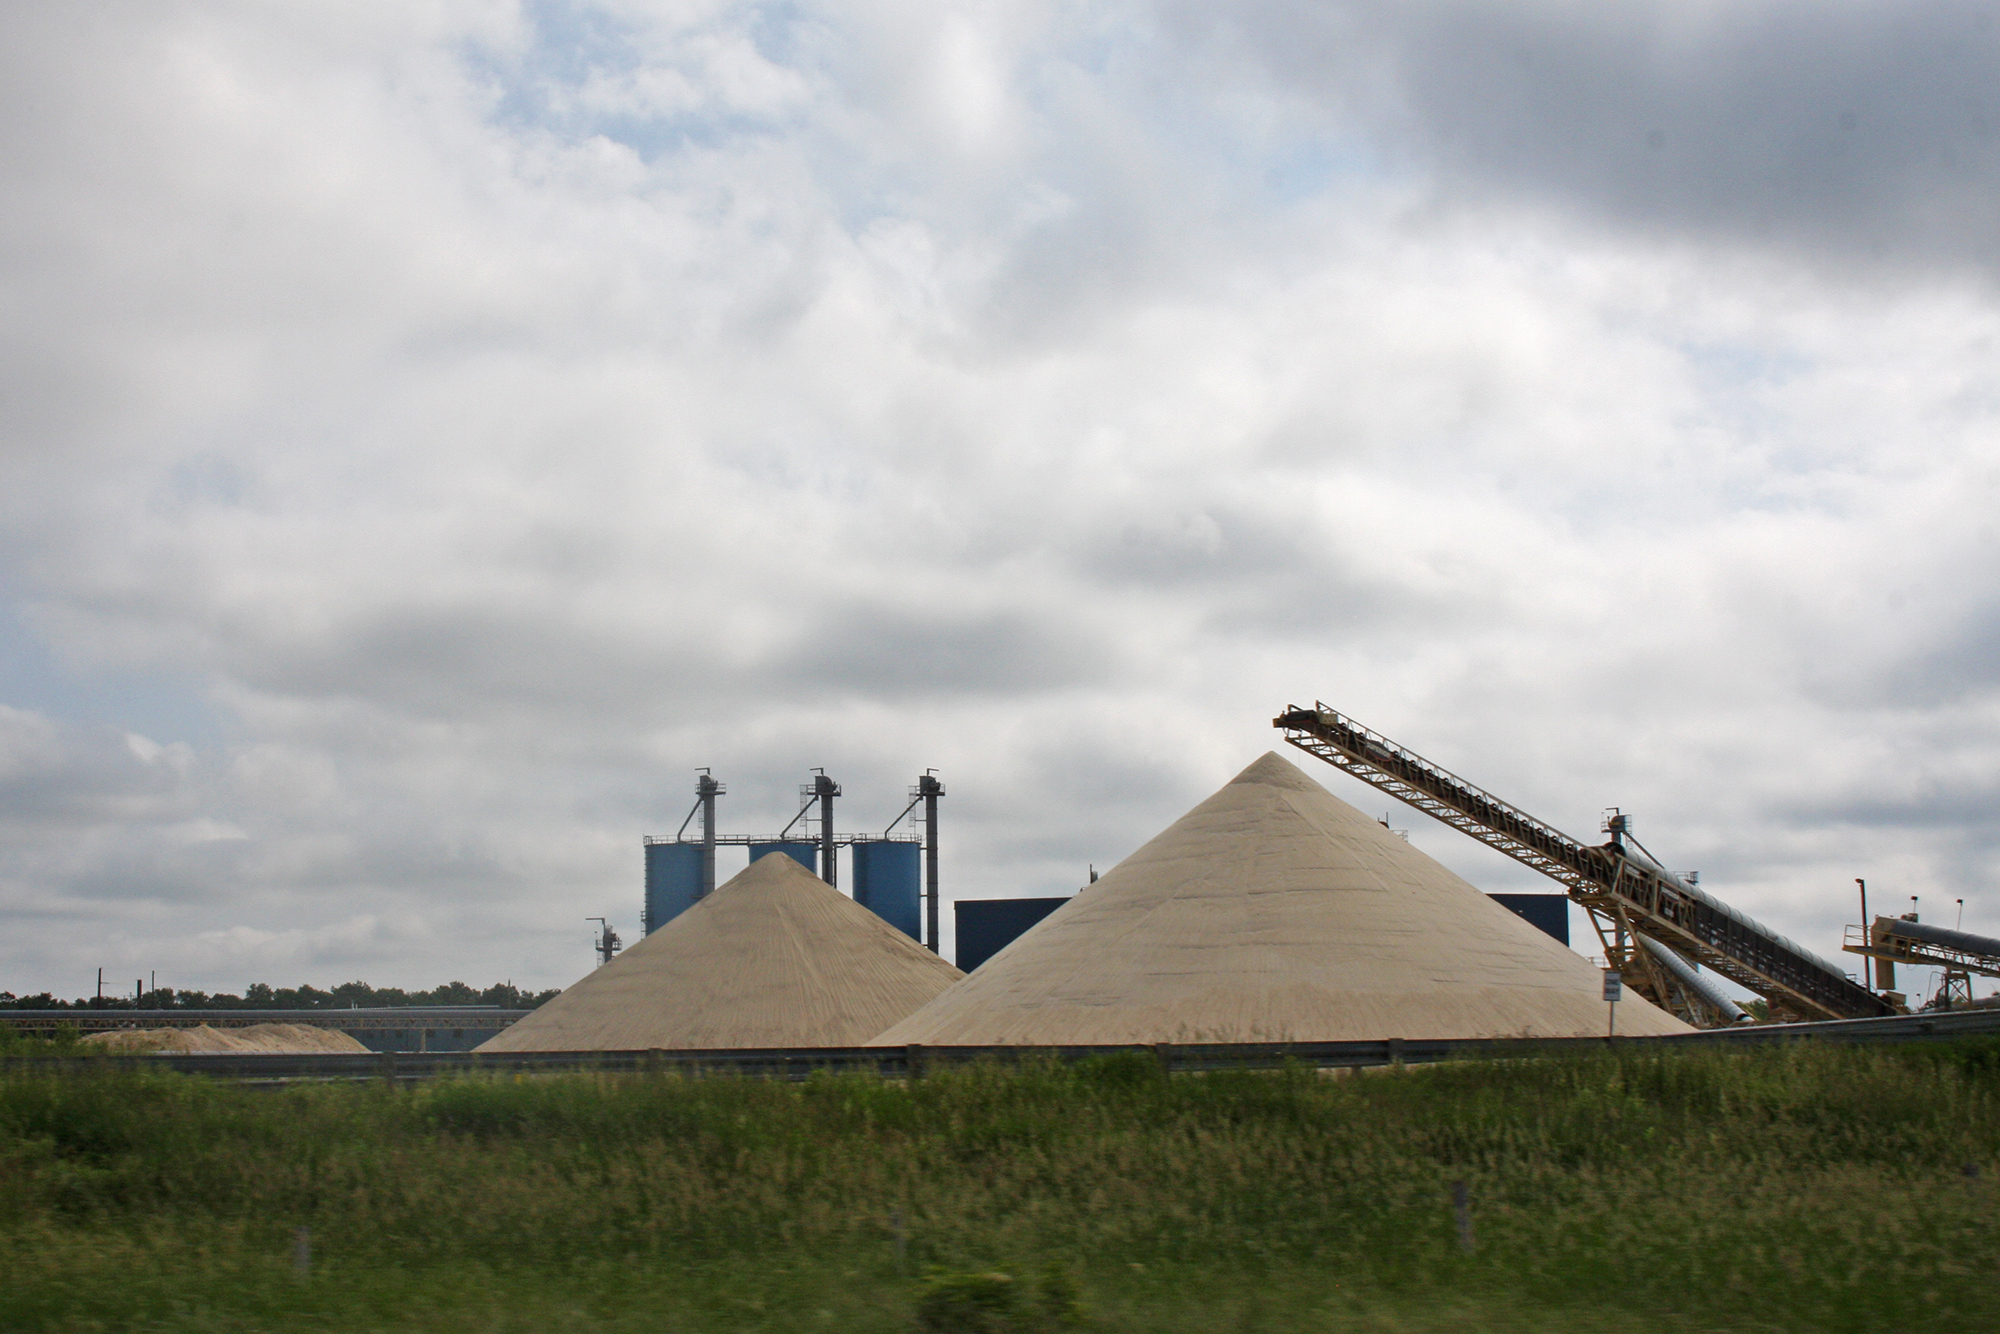 Frac sand seen at Chieftain Sand and Proppant, LLC